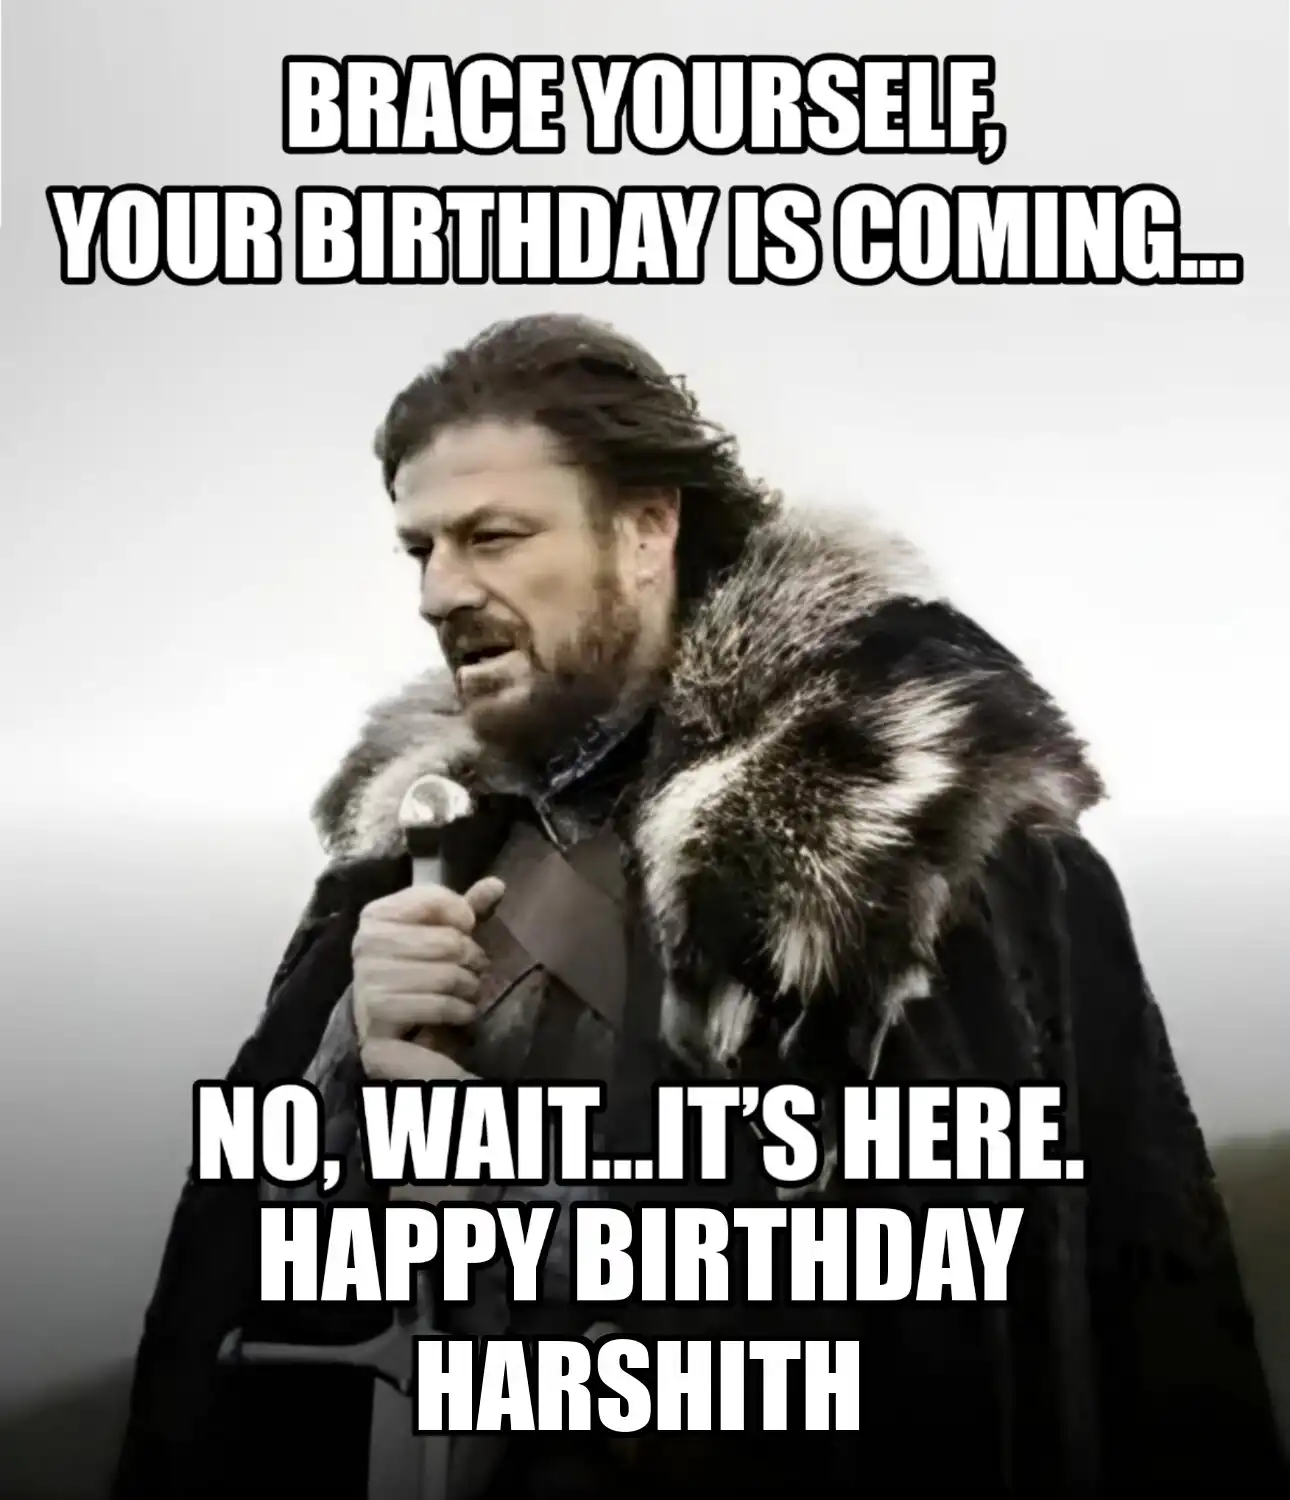 Happy Birthday Harshith Brace Yourself Your Birthday Is Coming Meme